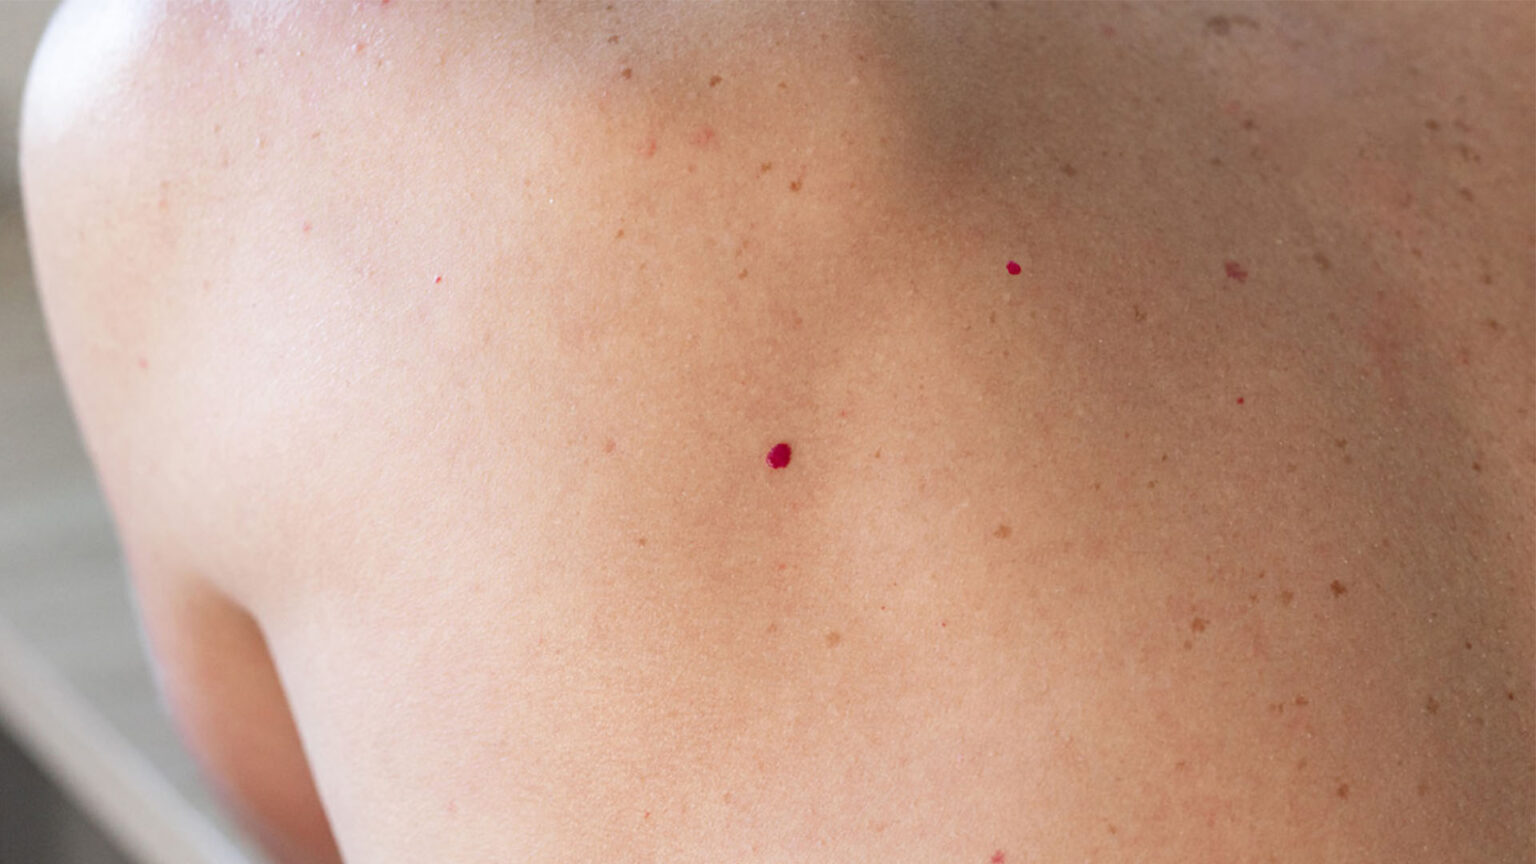 Cherry Angiomas, also known as red bumps, can appear anywhere on the body. Cherry Angiomas can be effectively remove with laser treatment - learn more on the red bump on your skin